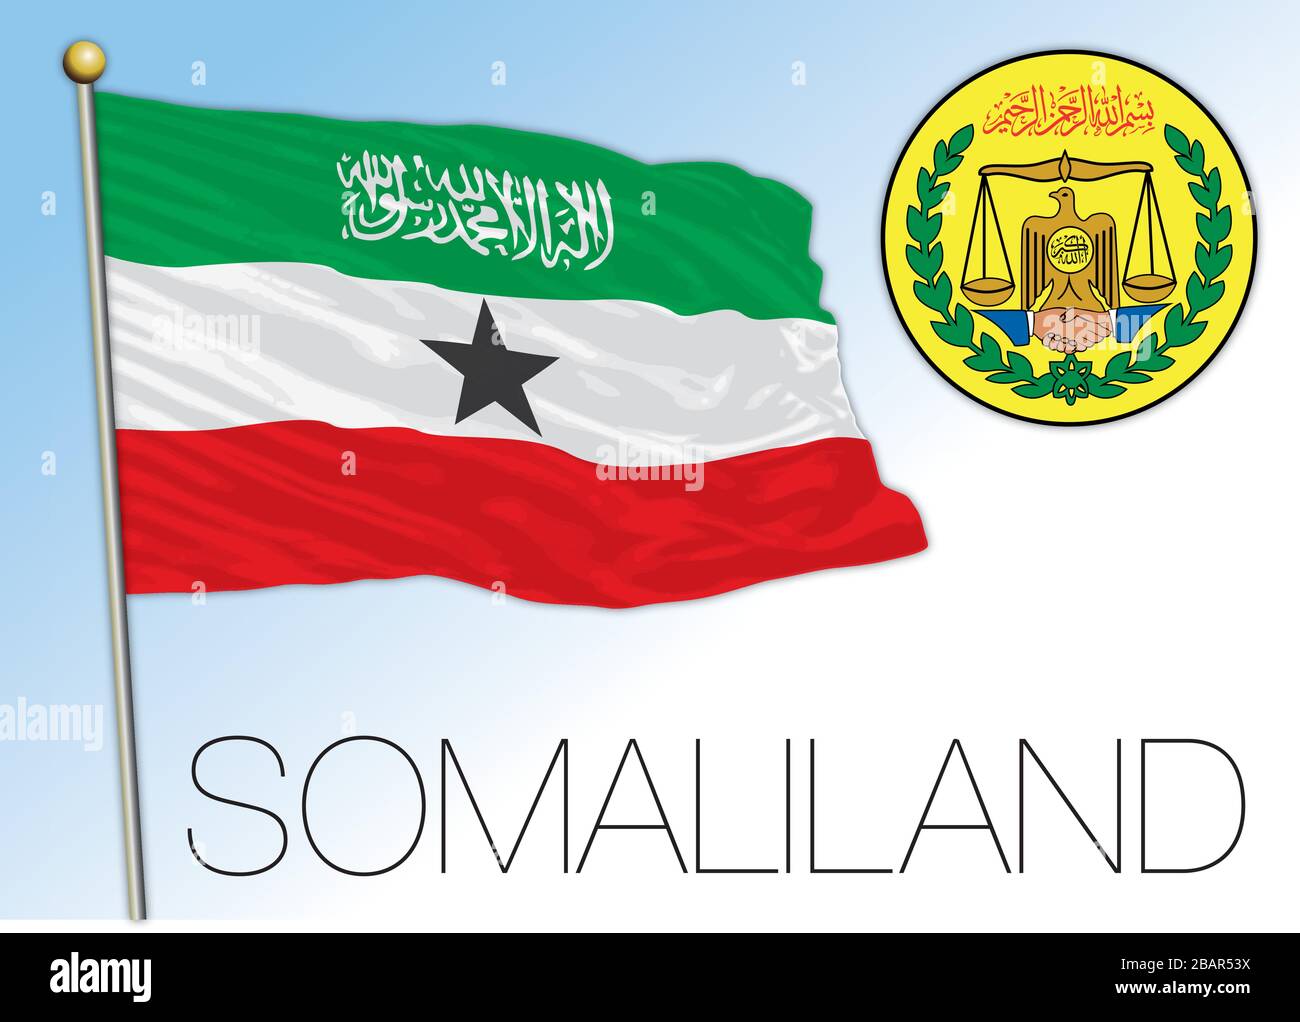 Somaliland official national flag and coat of arms, african country, vector illustration Stock Vector